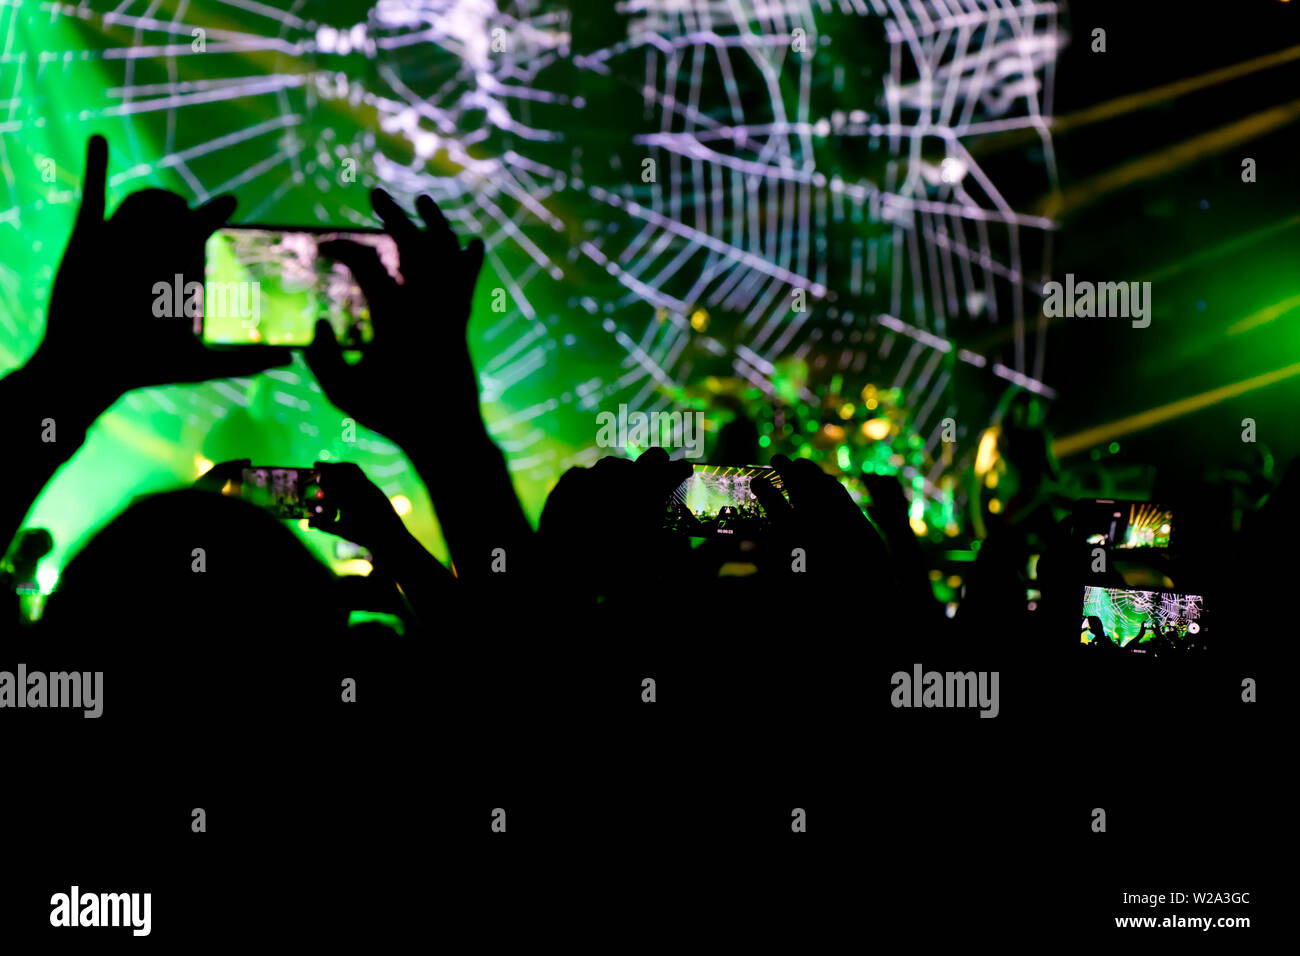 Collecting digital memory is loosing capability of being present, silhouette of people shooting the pop rock concert with mobile phones Stock Photo